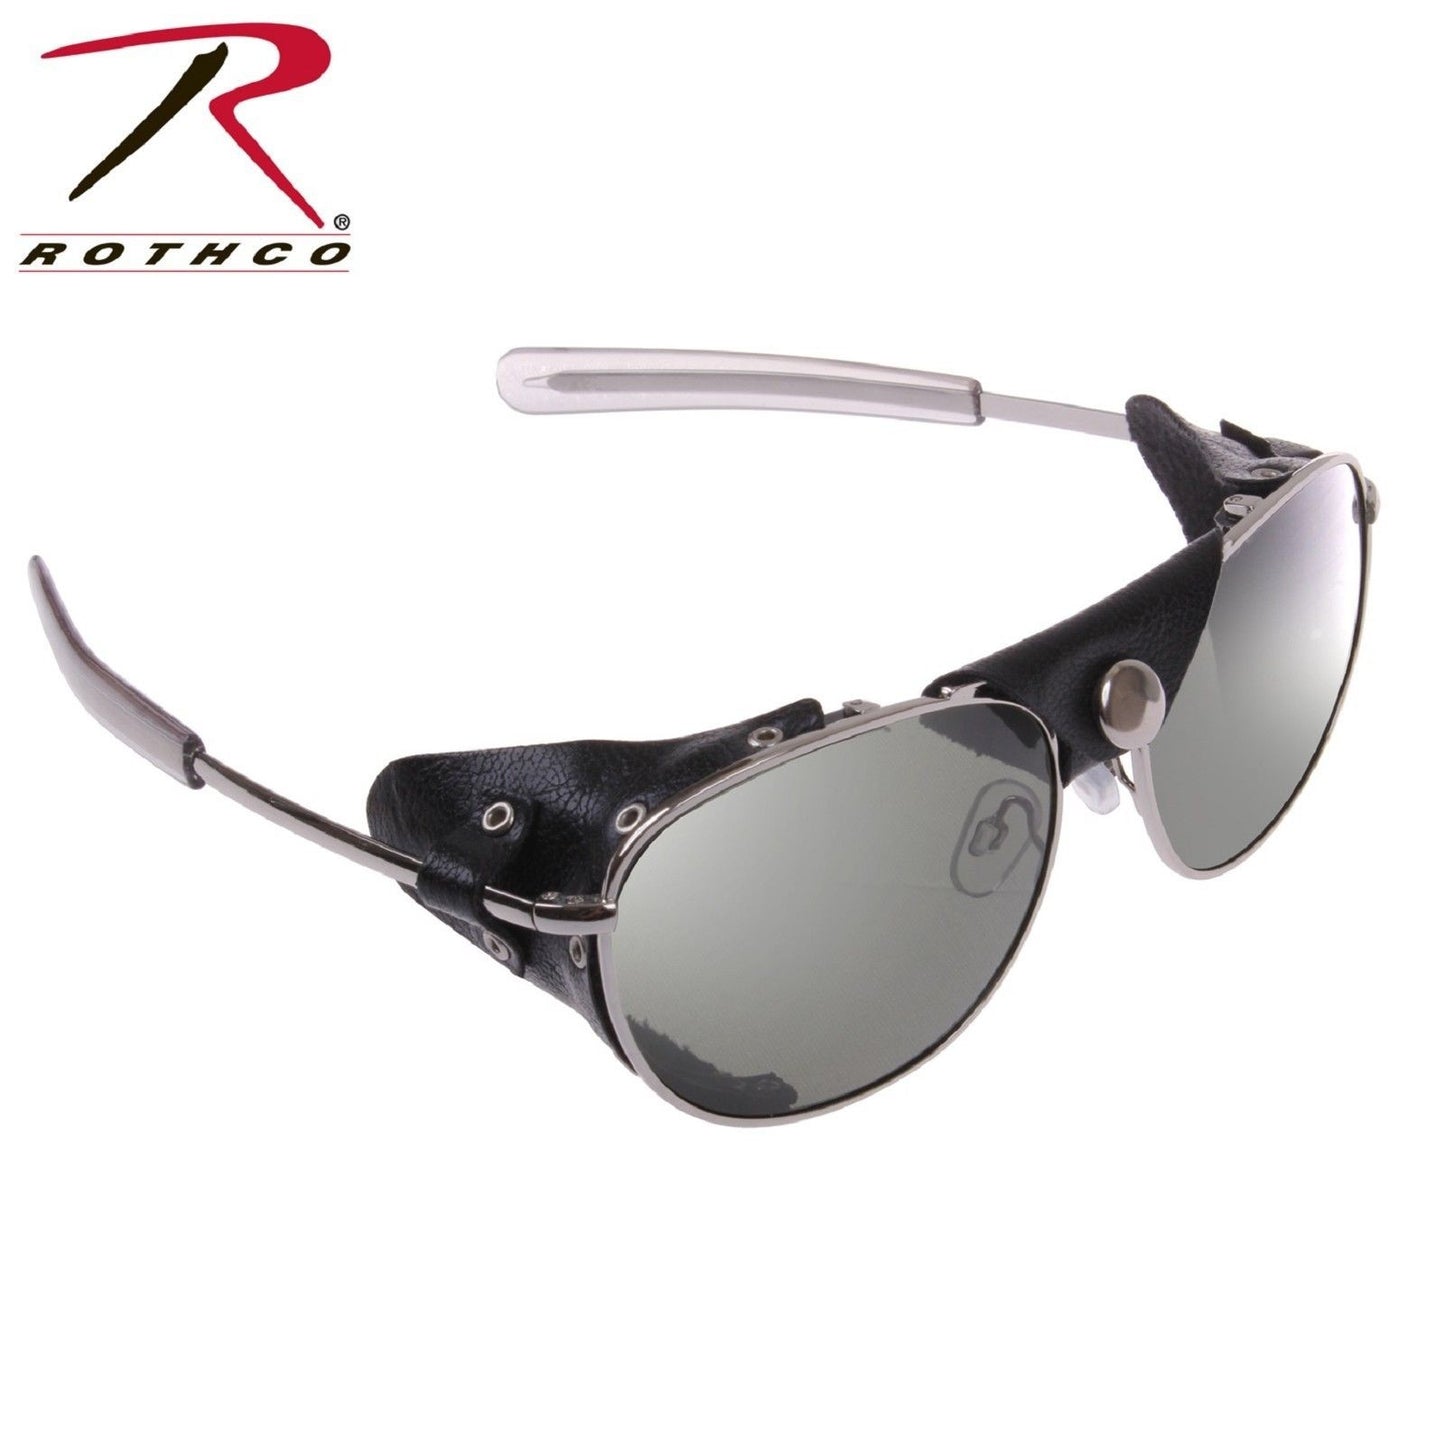 Tactical Windguard Aviator Style Sunglasses With Leather Wind Guard Rothco 20380